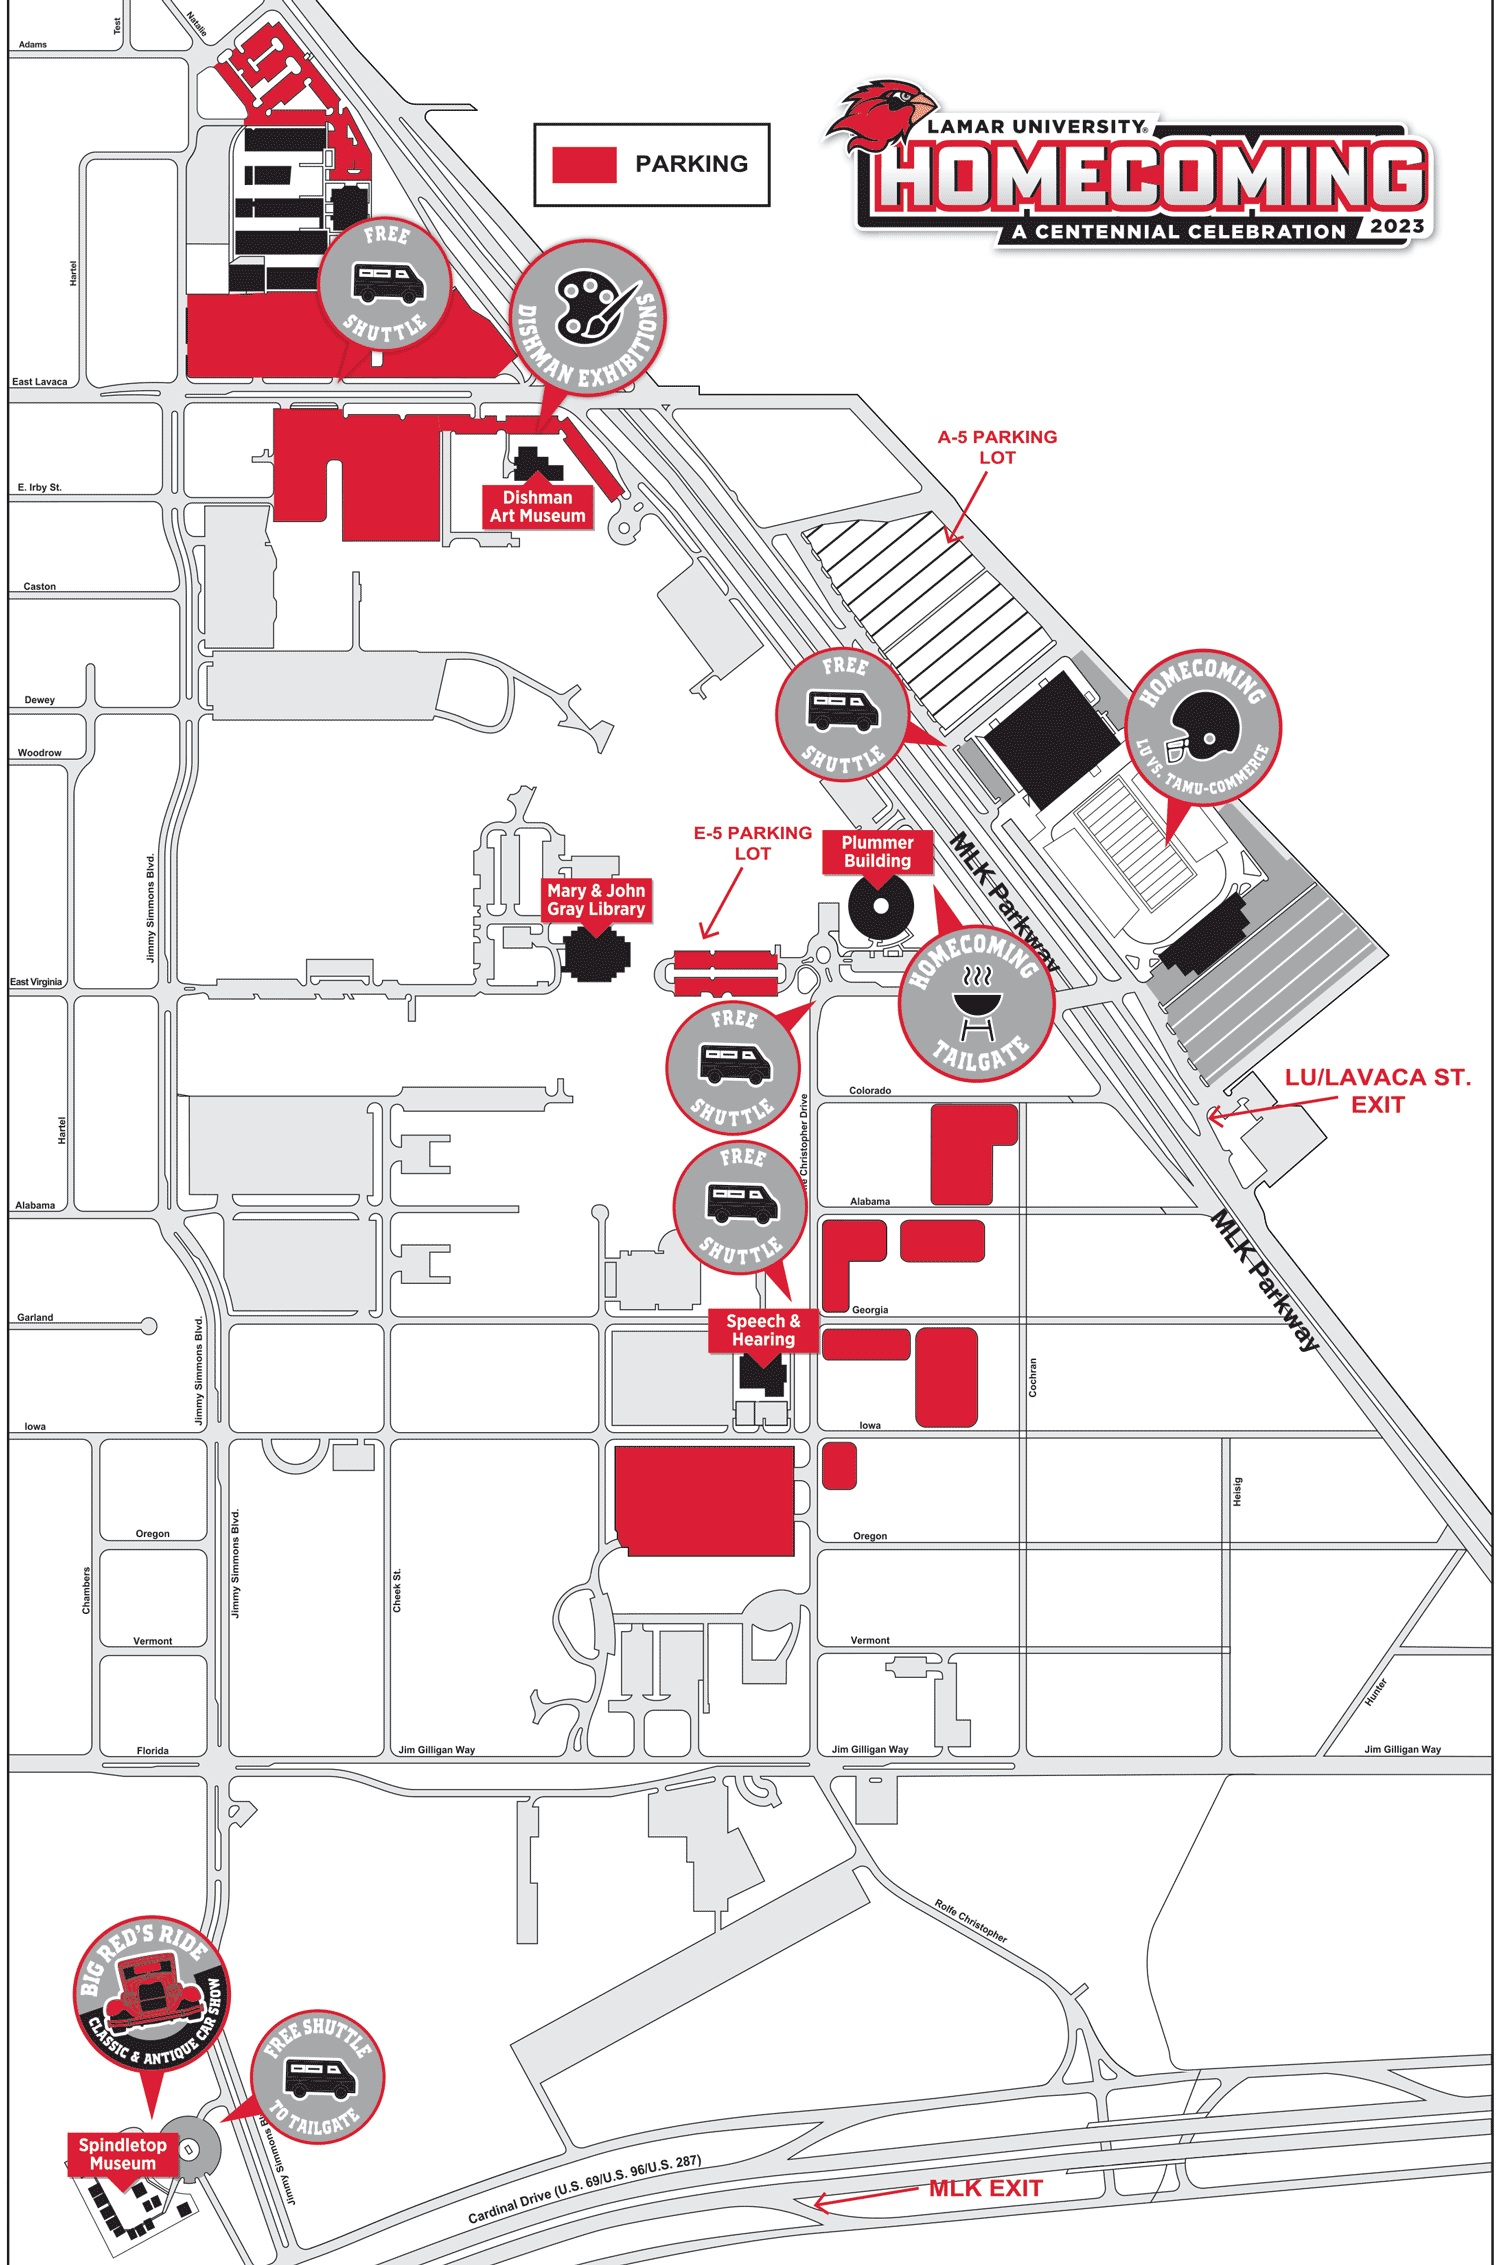 Homecoming Parking and Event Map